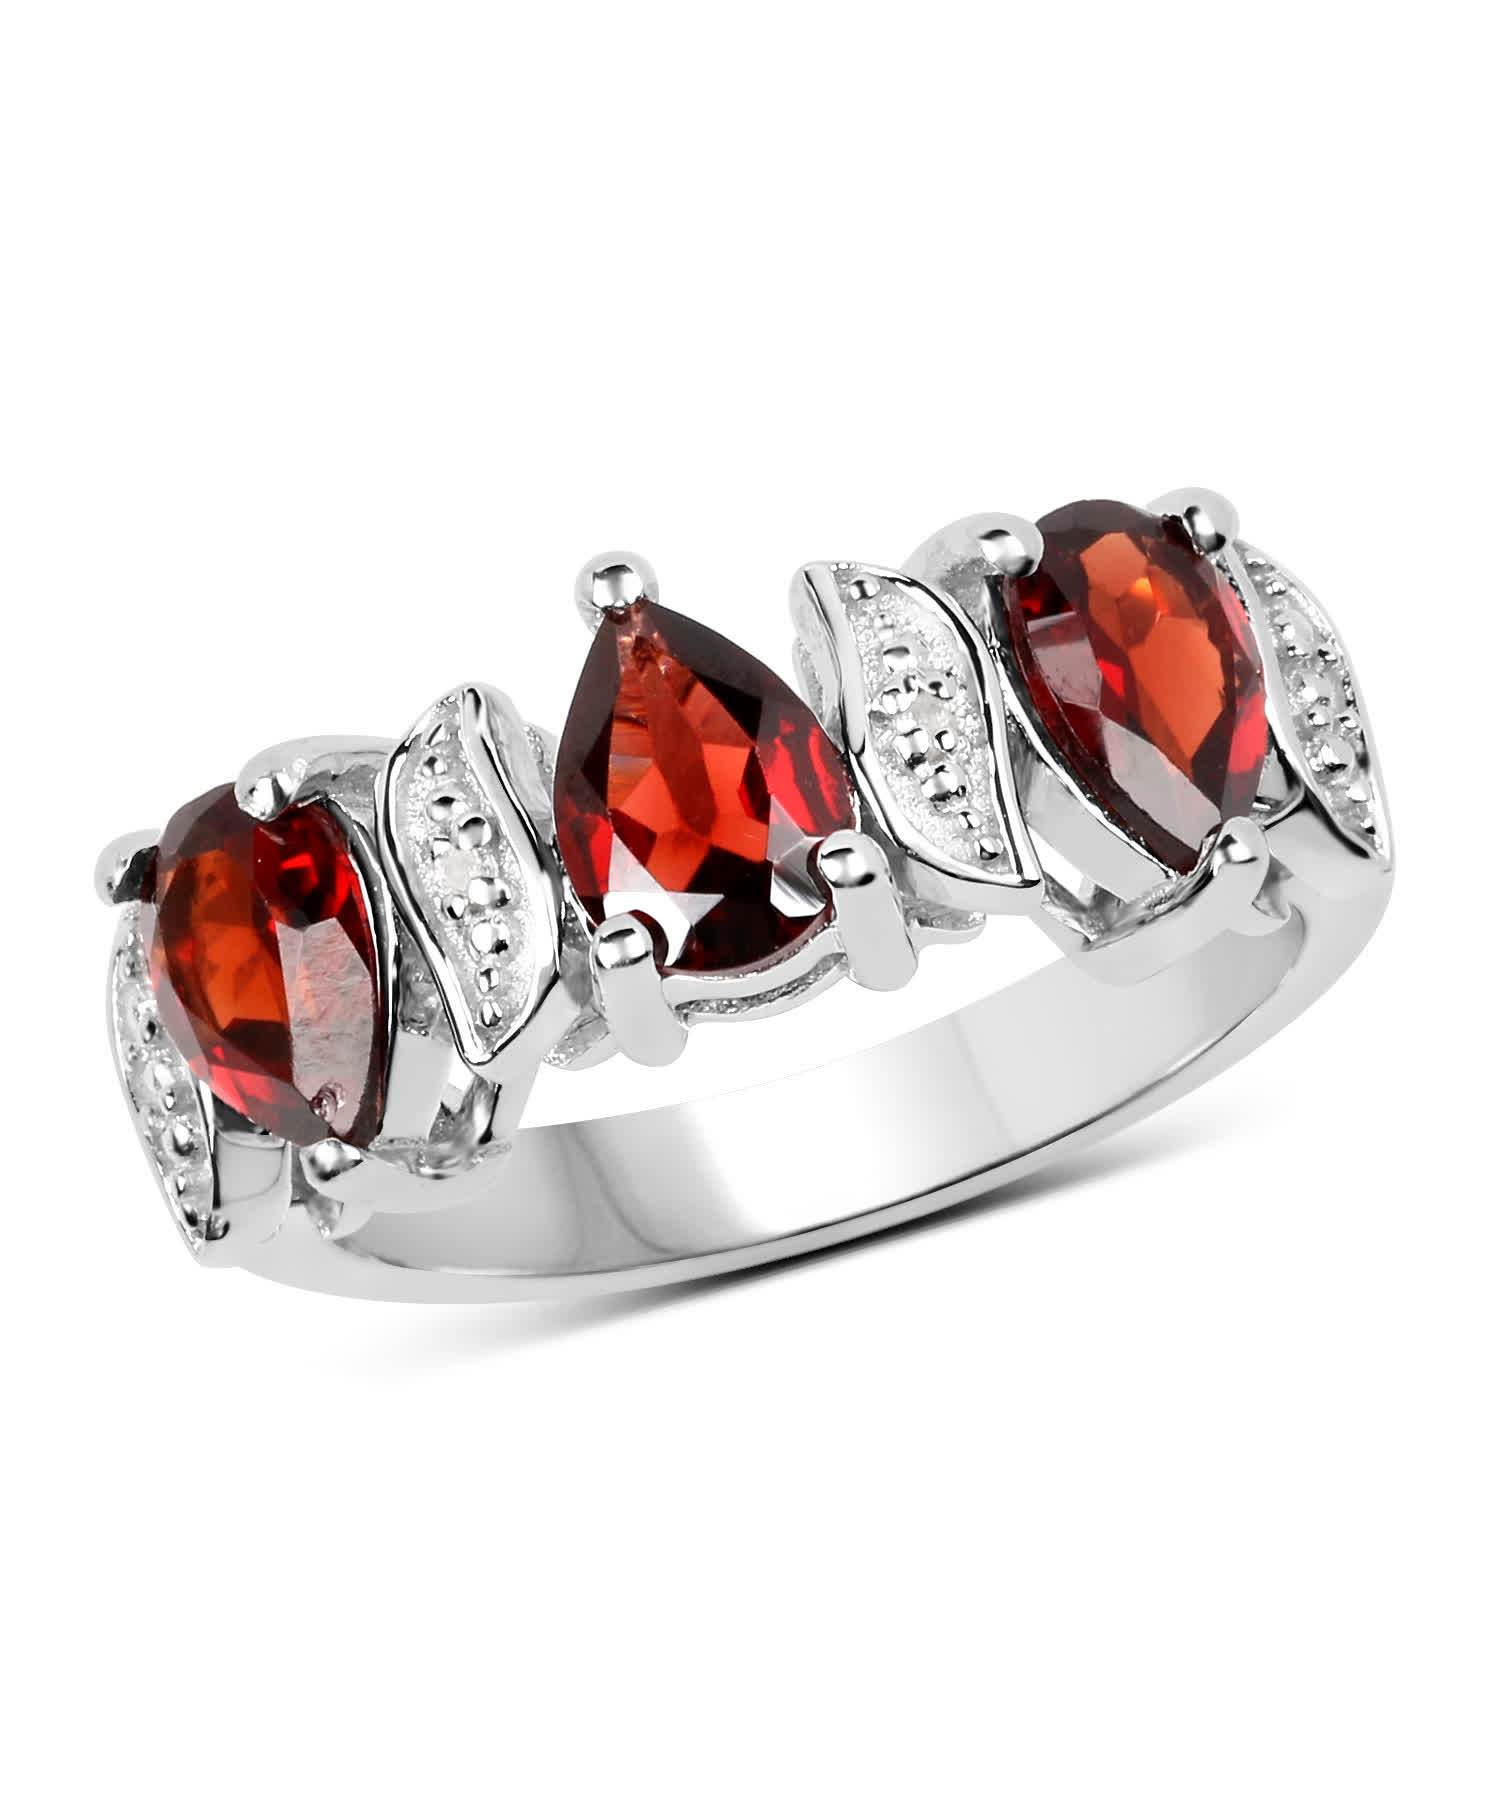 2.56ctw Natural Garnet and Topaz Rhodium Plated 925 Sterling Silver Right Hand Ring View 1